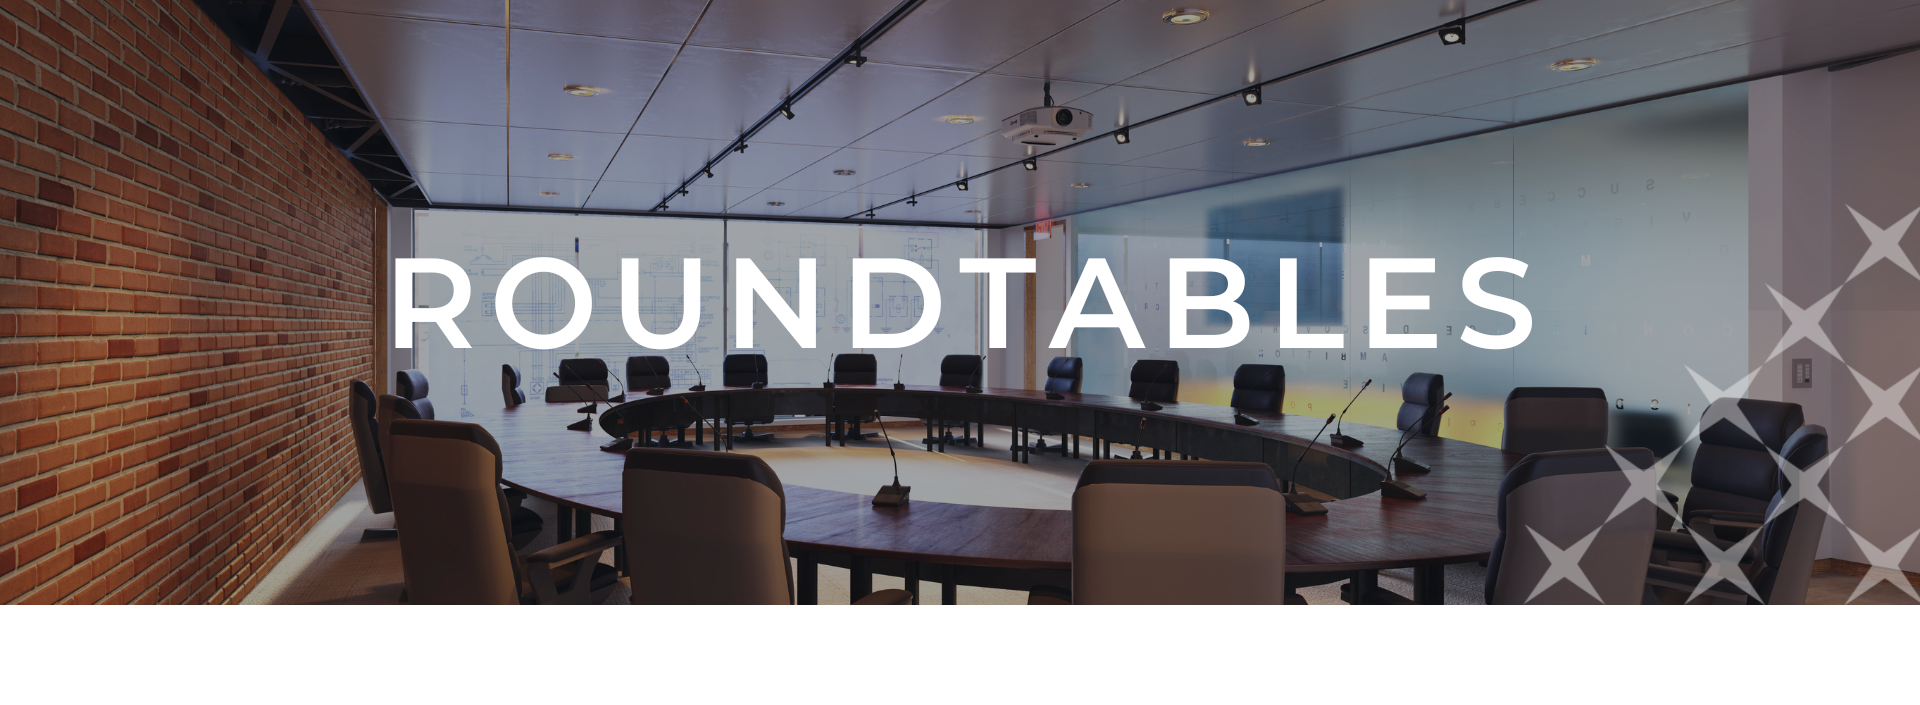 Roundtable Events